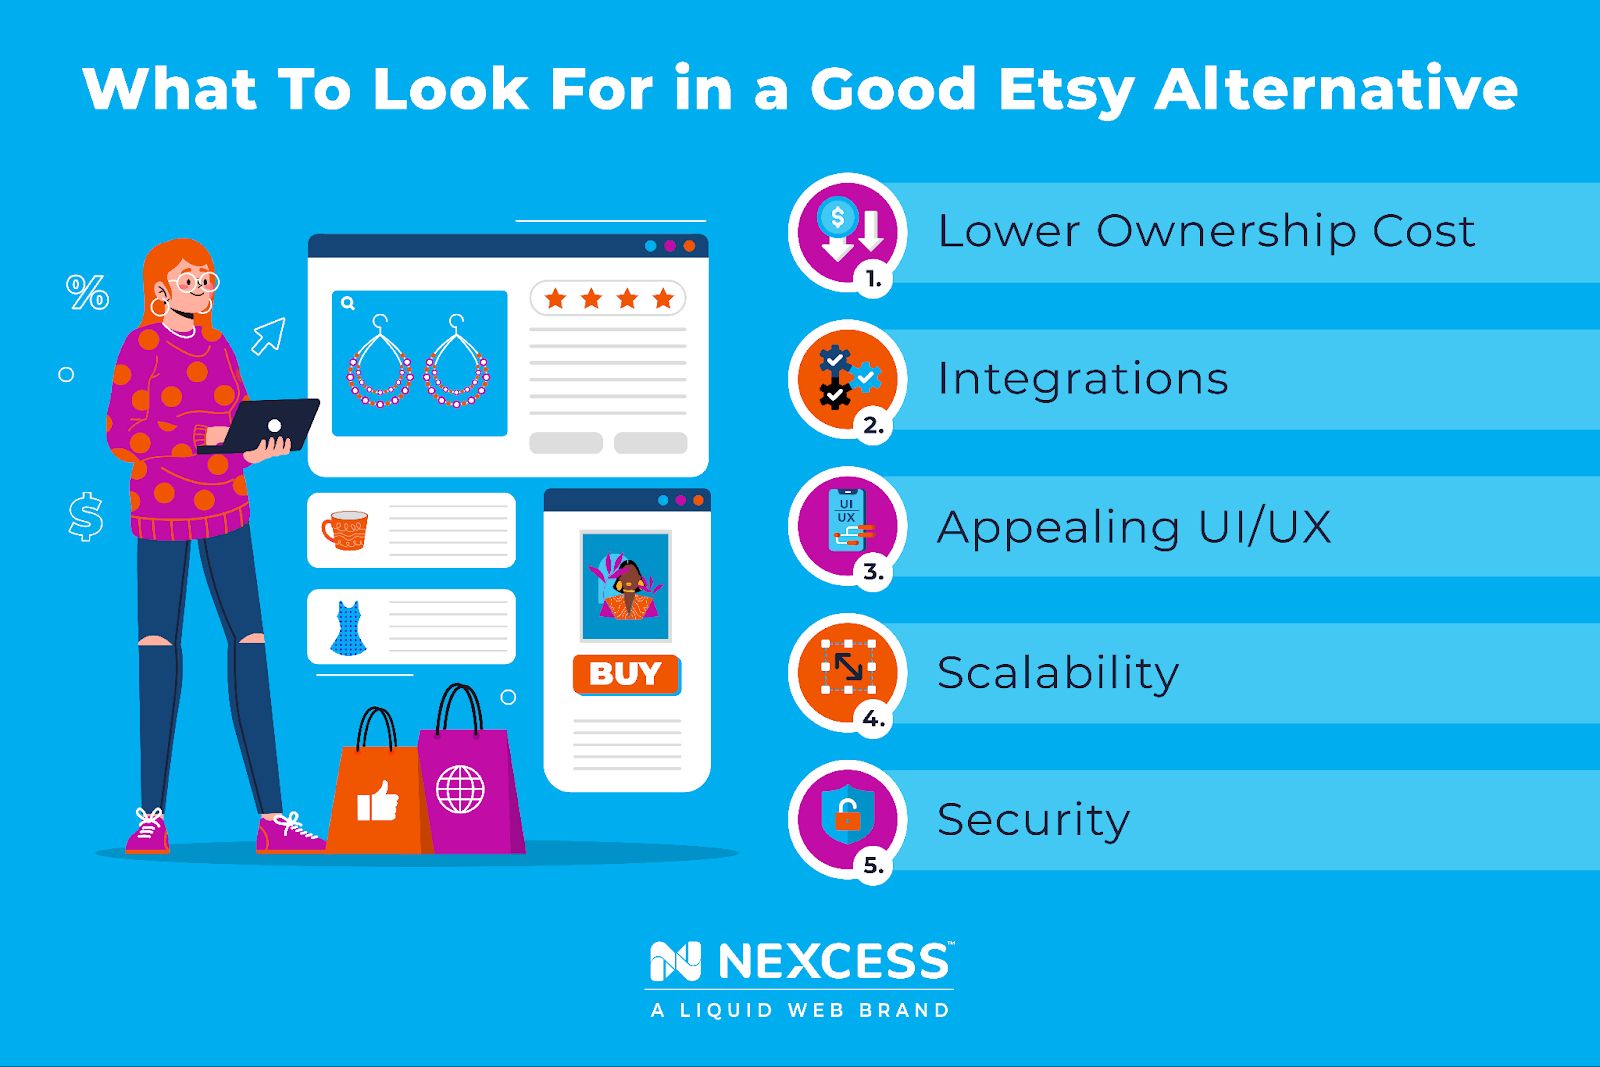 What To Look For in a Good Etsy Alternative